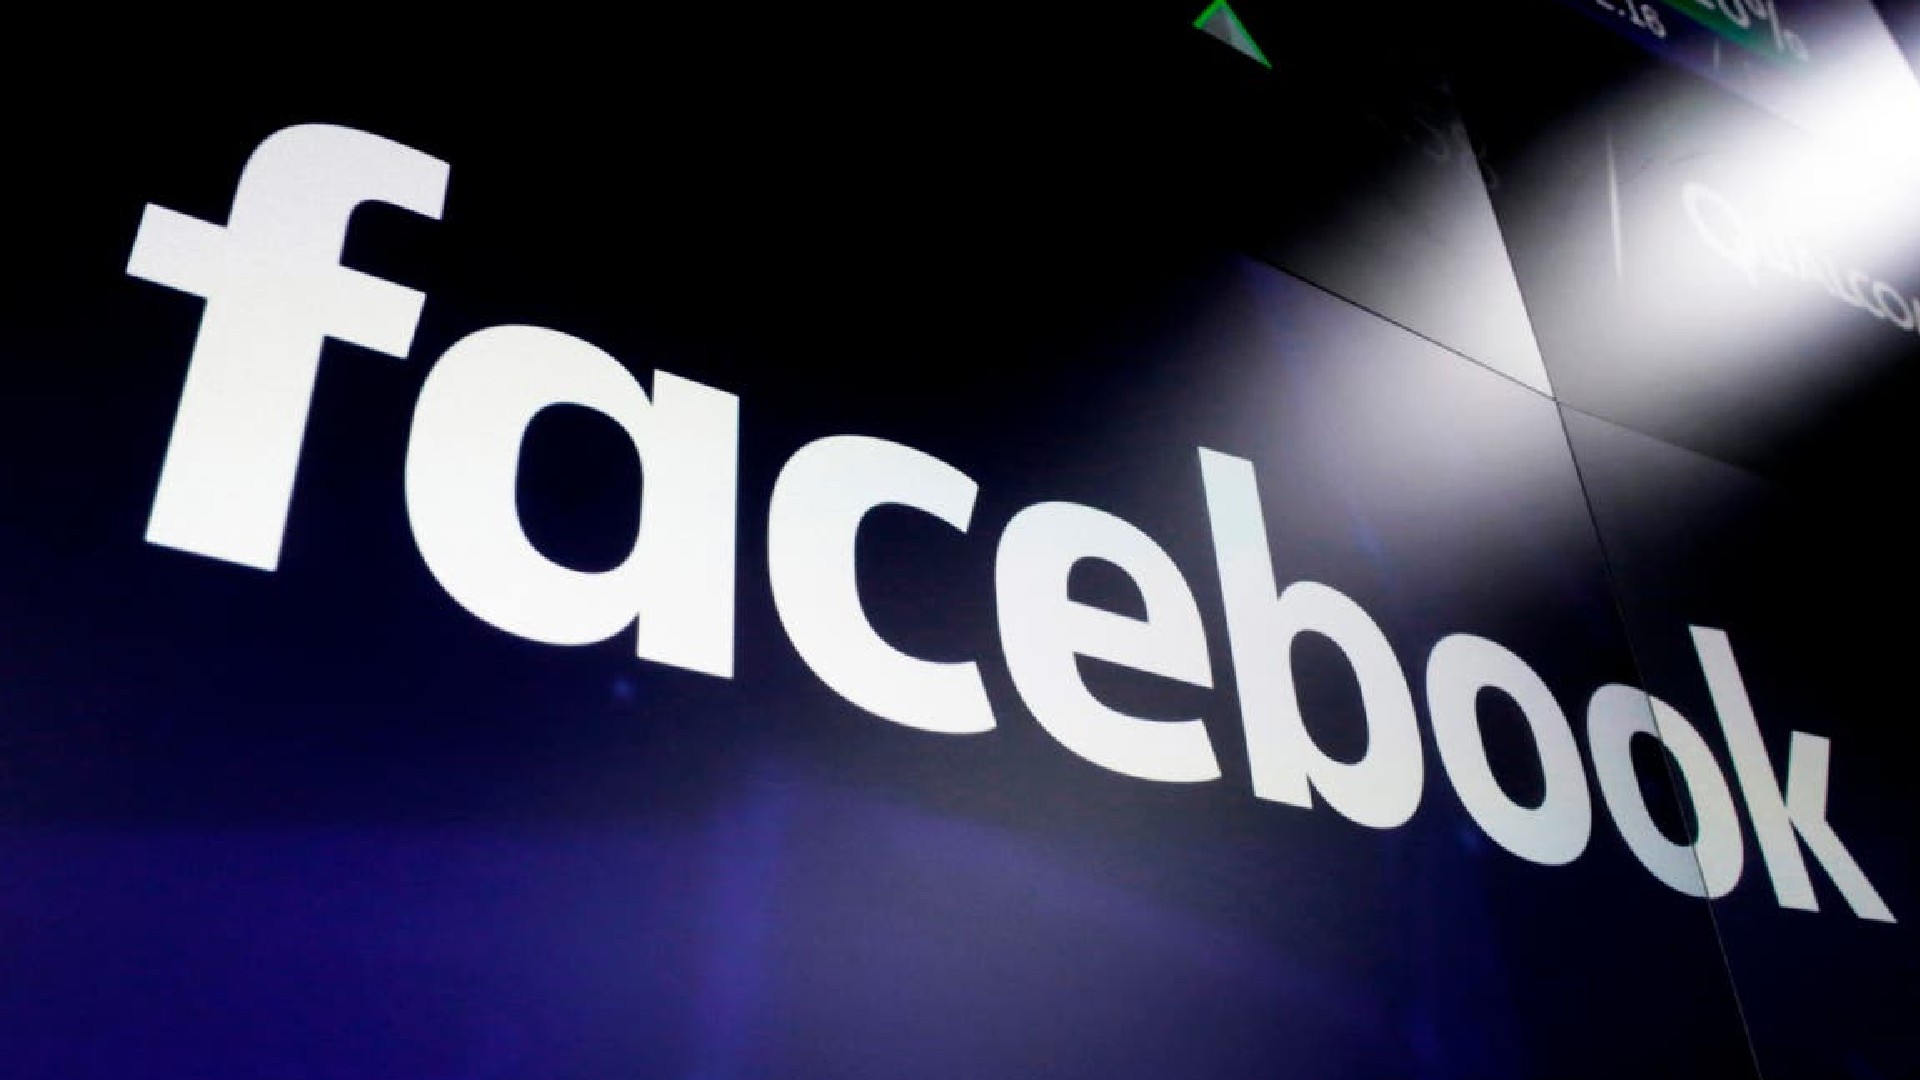 Facebook, WhatsApp seek relief from a government investigation of privacy policies.